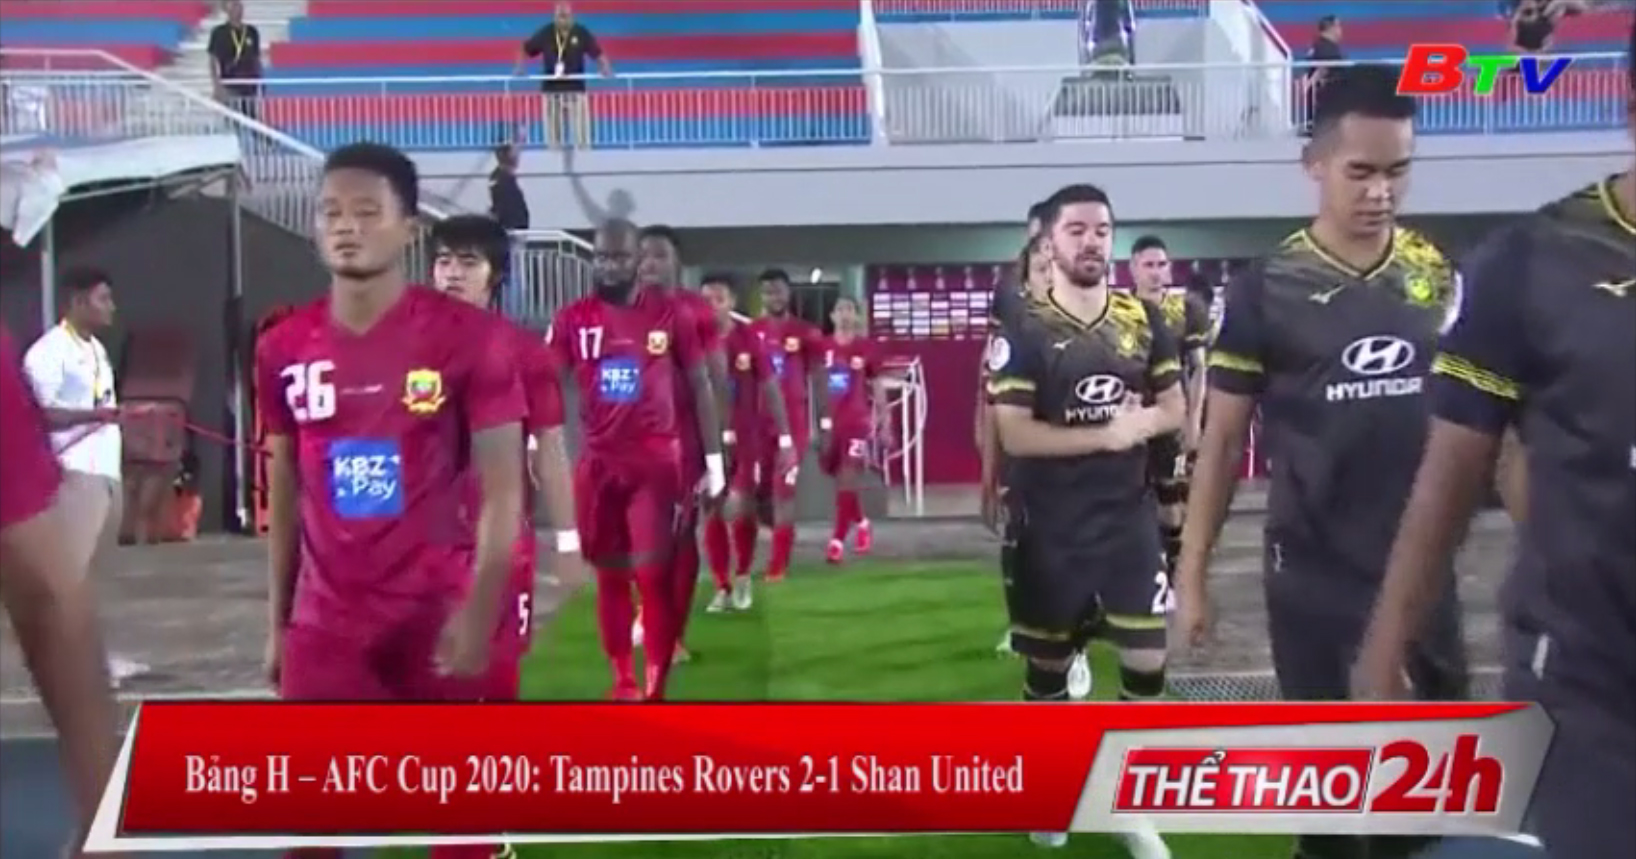 Bảng H AFC Cup 2020 – Tampines Rovers 2-1 Shan United